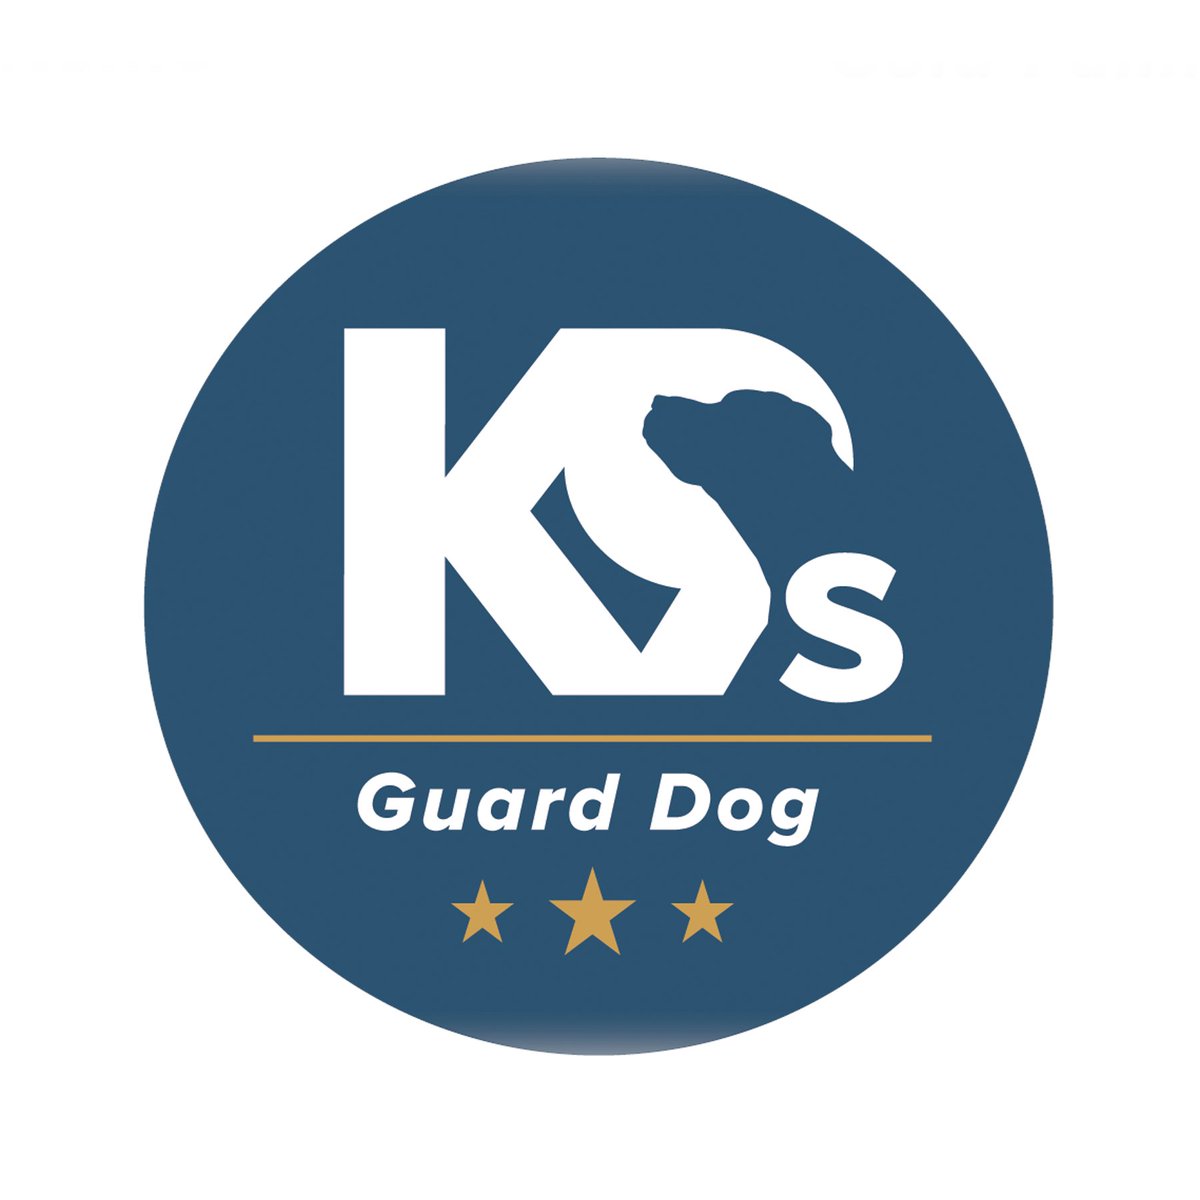 Congratulations to #K9forWarriors on their 10-year anniversary and new logo. K9’s for Warriors is the nation's largest veteran service organization providing highly skilled service dogs to disabled American heroes. We are amazed by your achievements.  k9sforwarriors.org